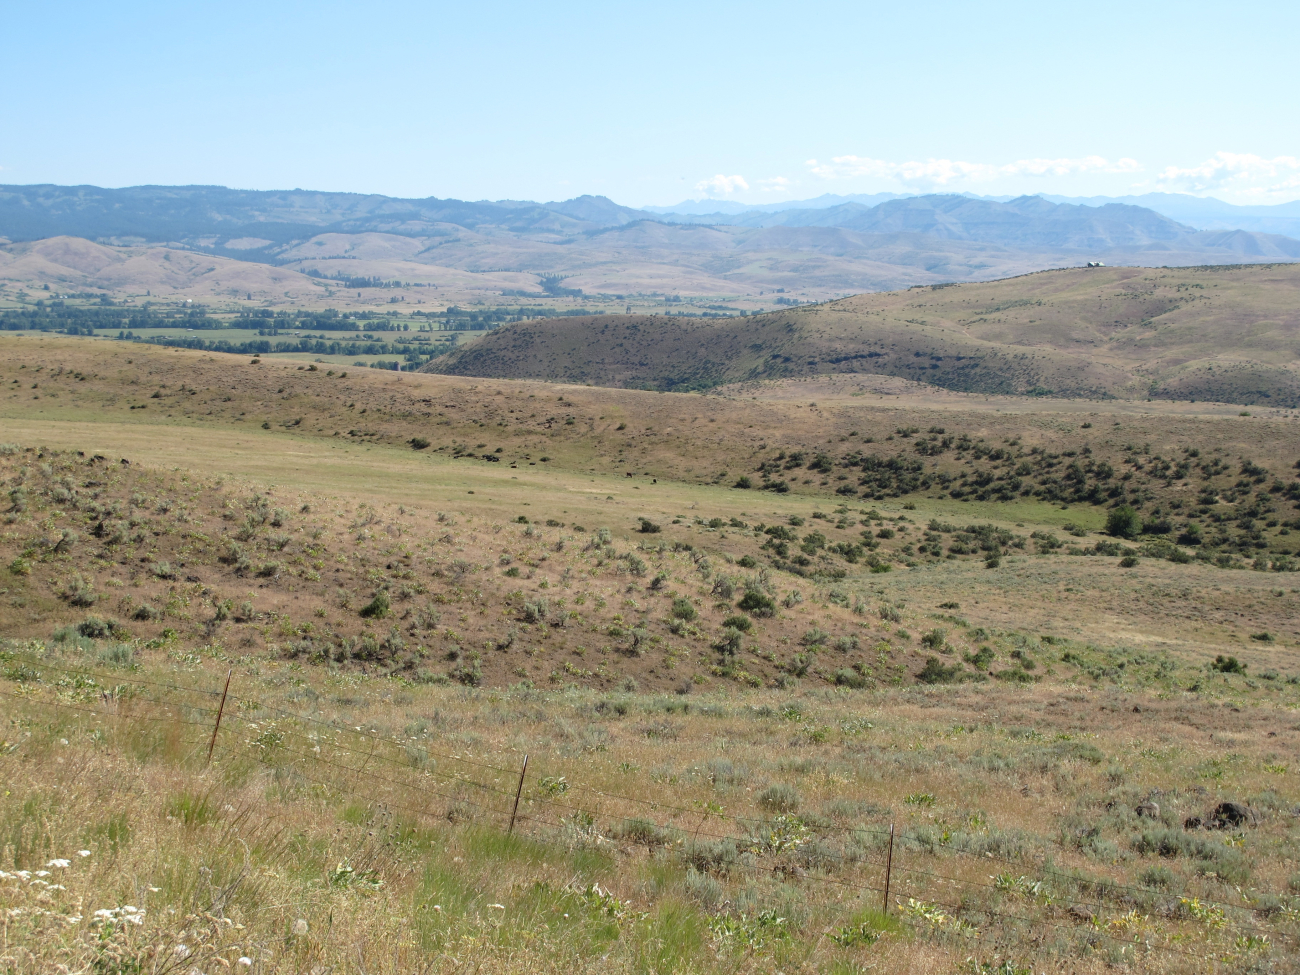 Looking down into Pine Valley along Oregon State highway 86 just outside ofHalfway